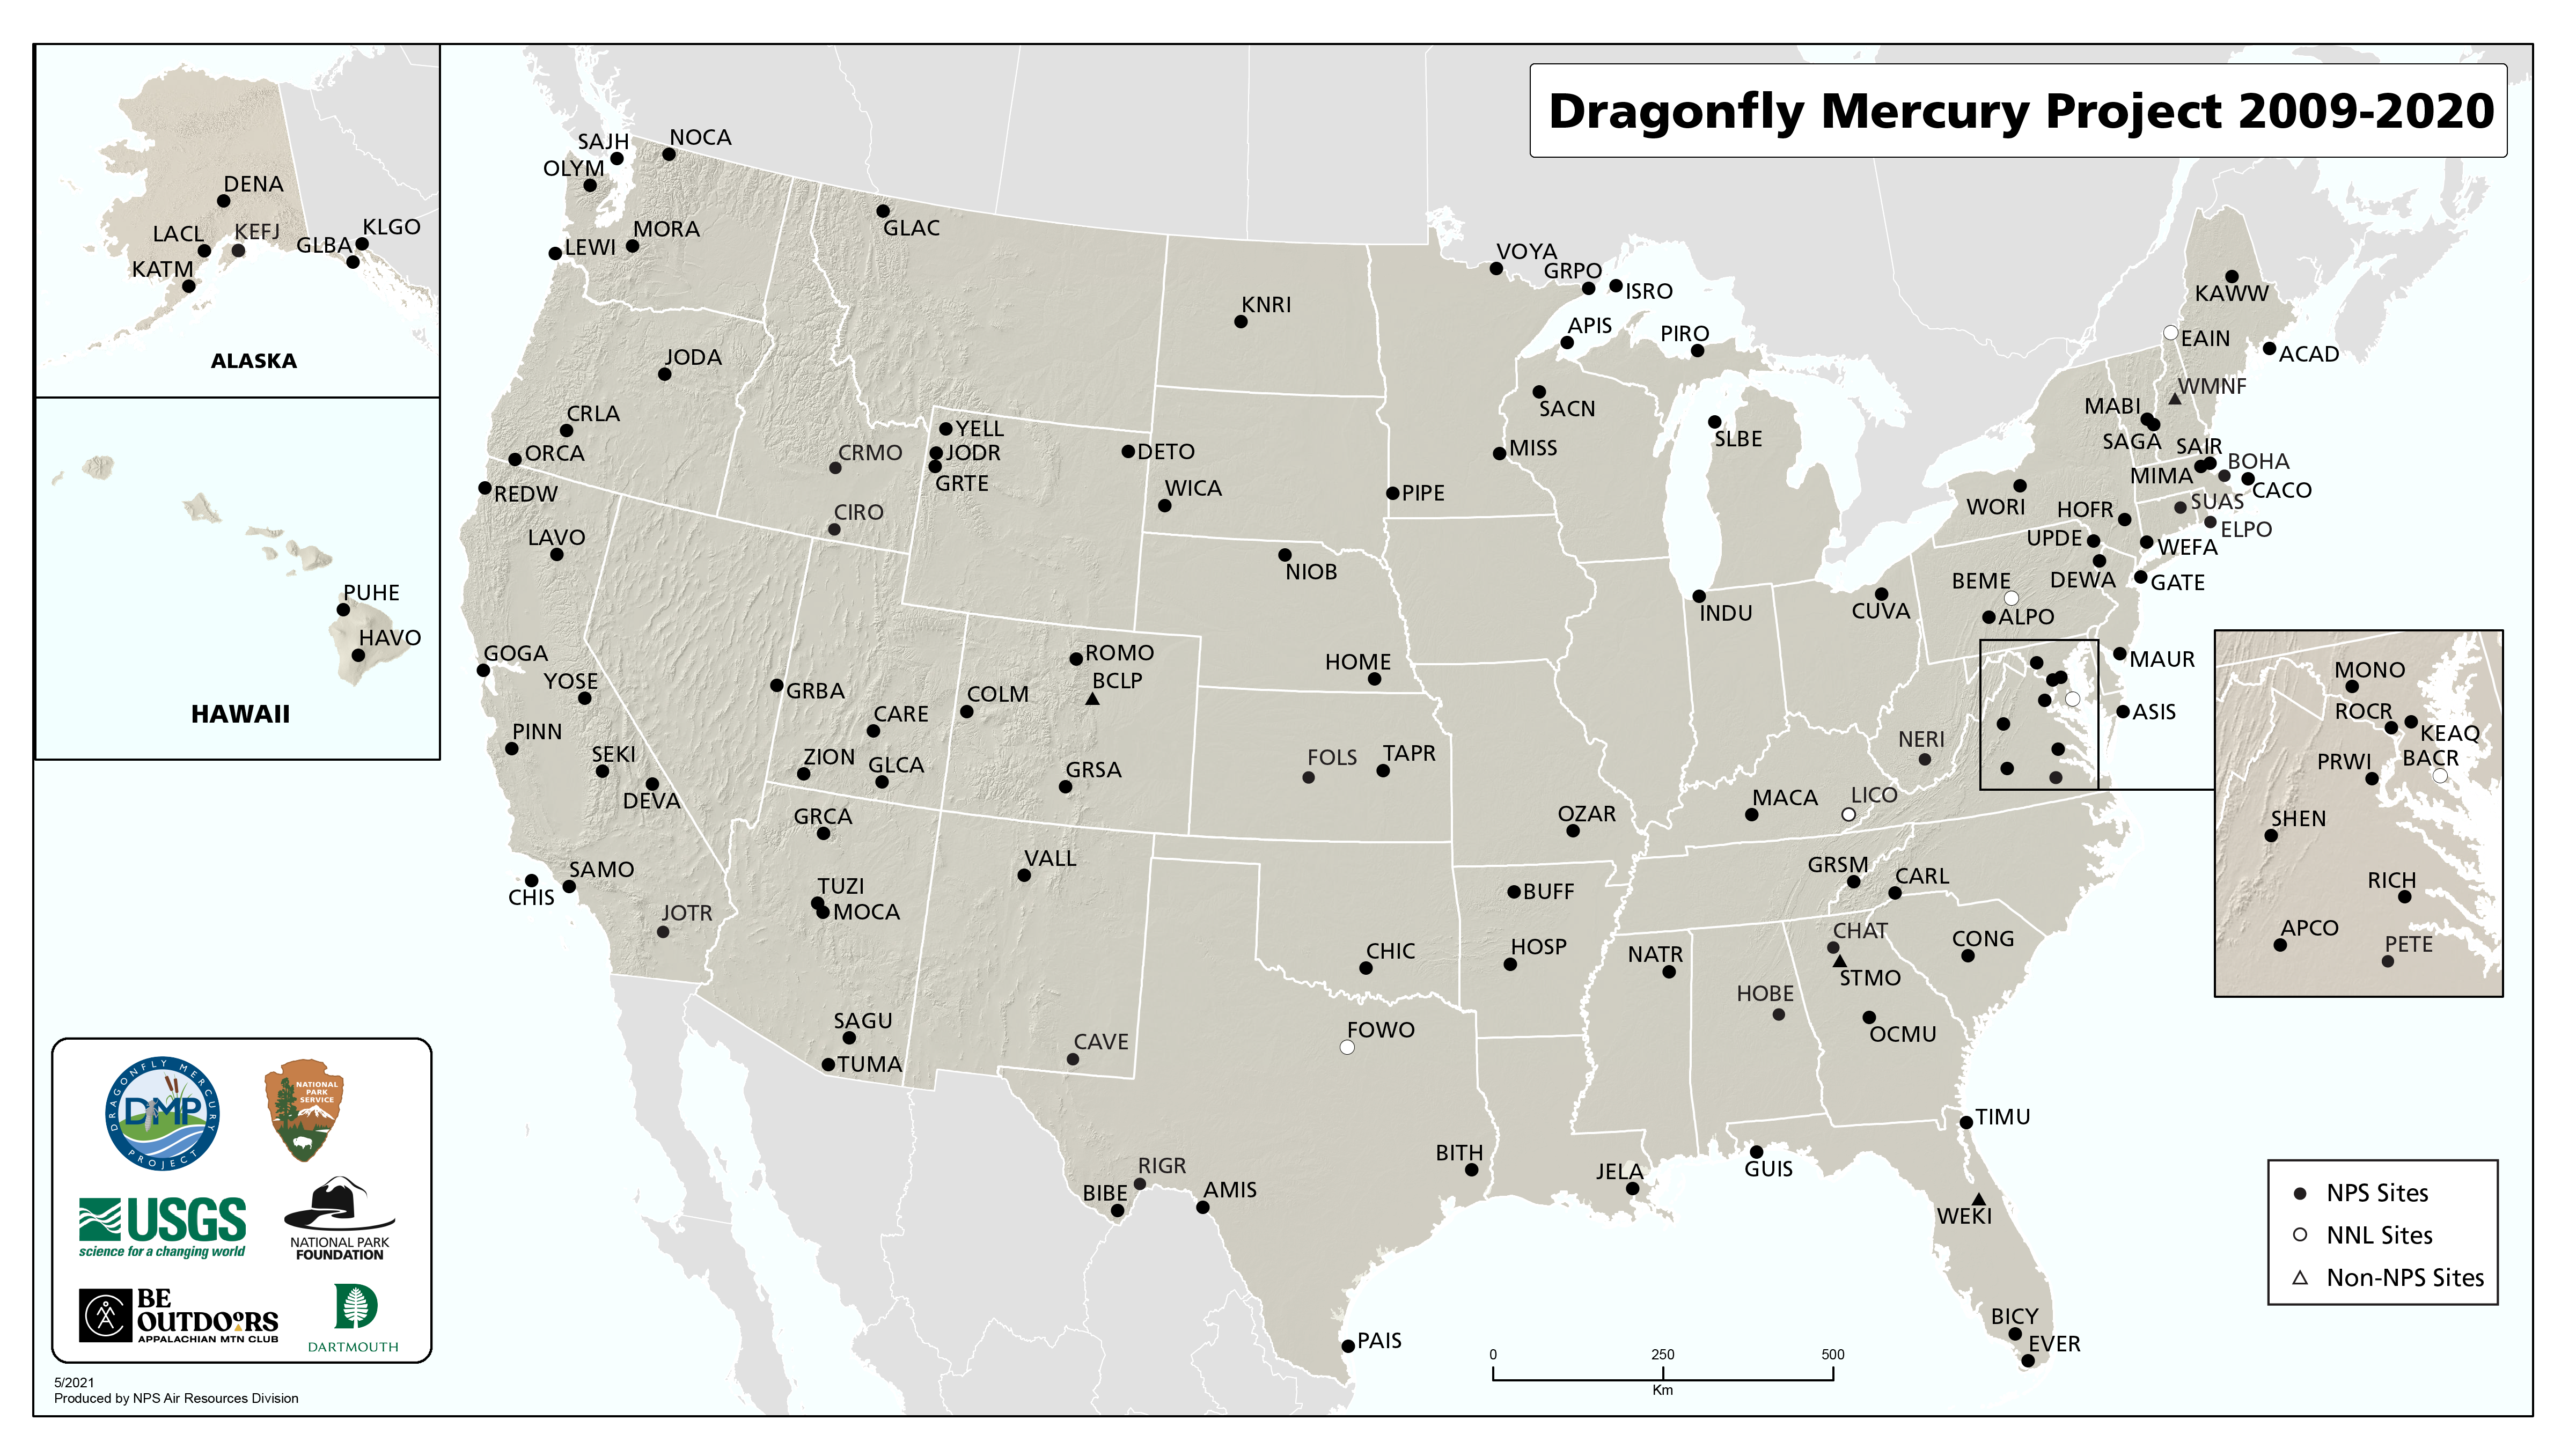 Map of the United States showing National Park Service units that have participated in the Dragonfly Mercury Project.